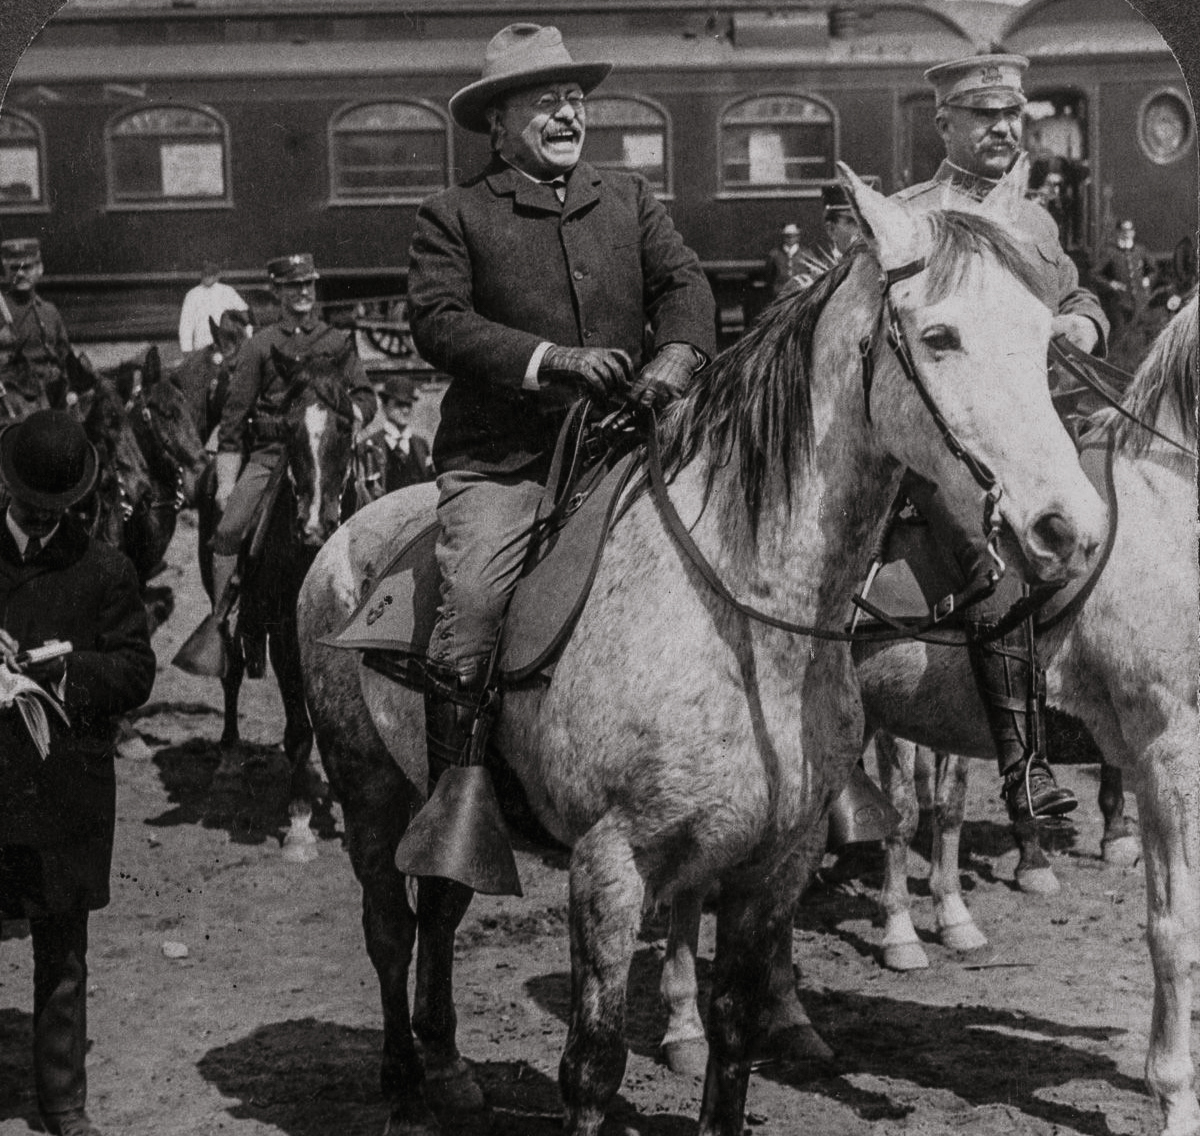 President Roosevelt arriving at Yellowstone National Park in 1903.